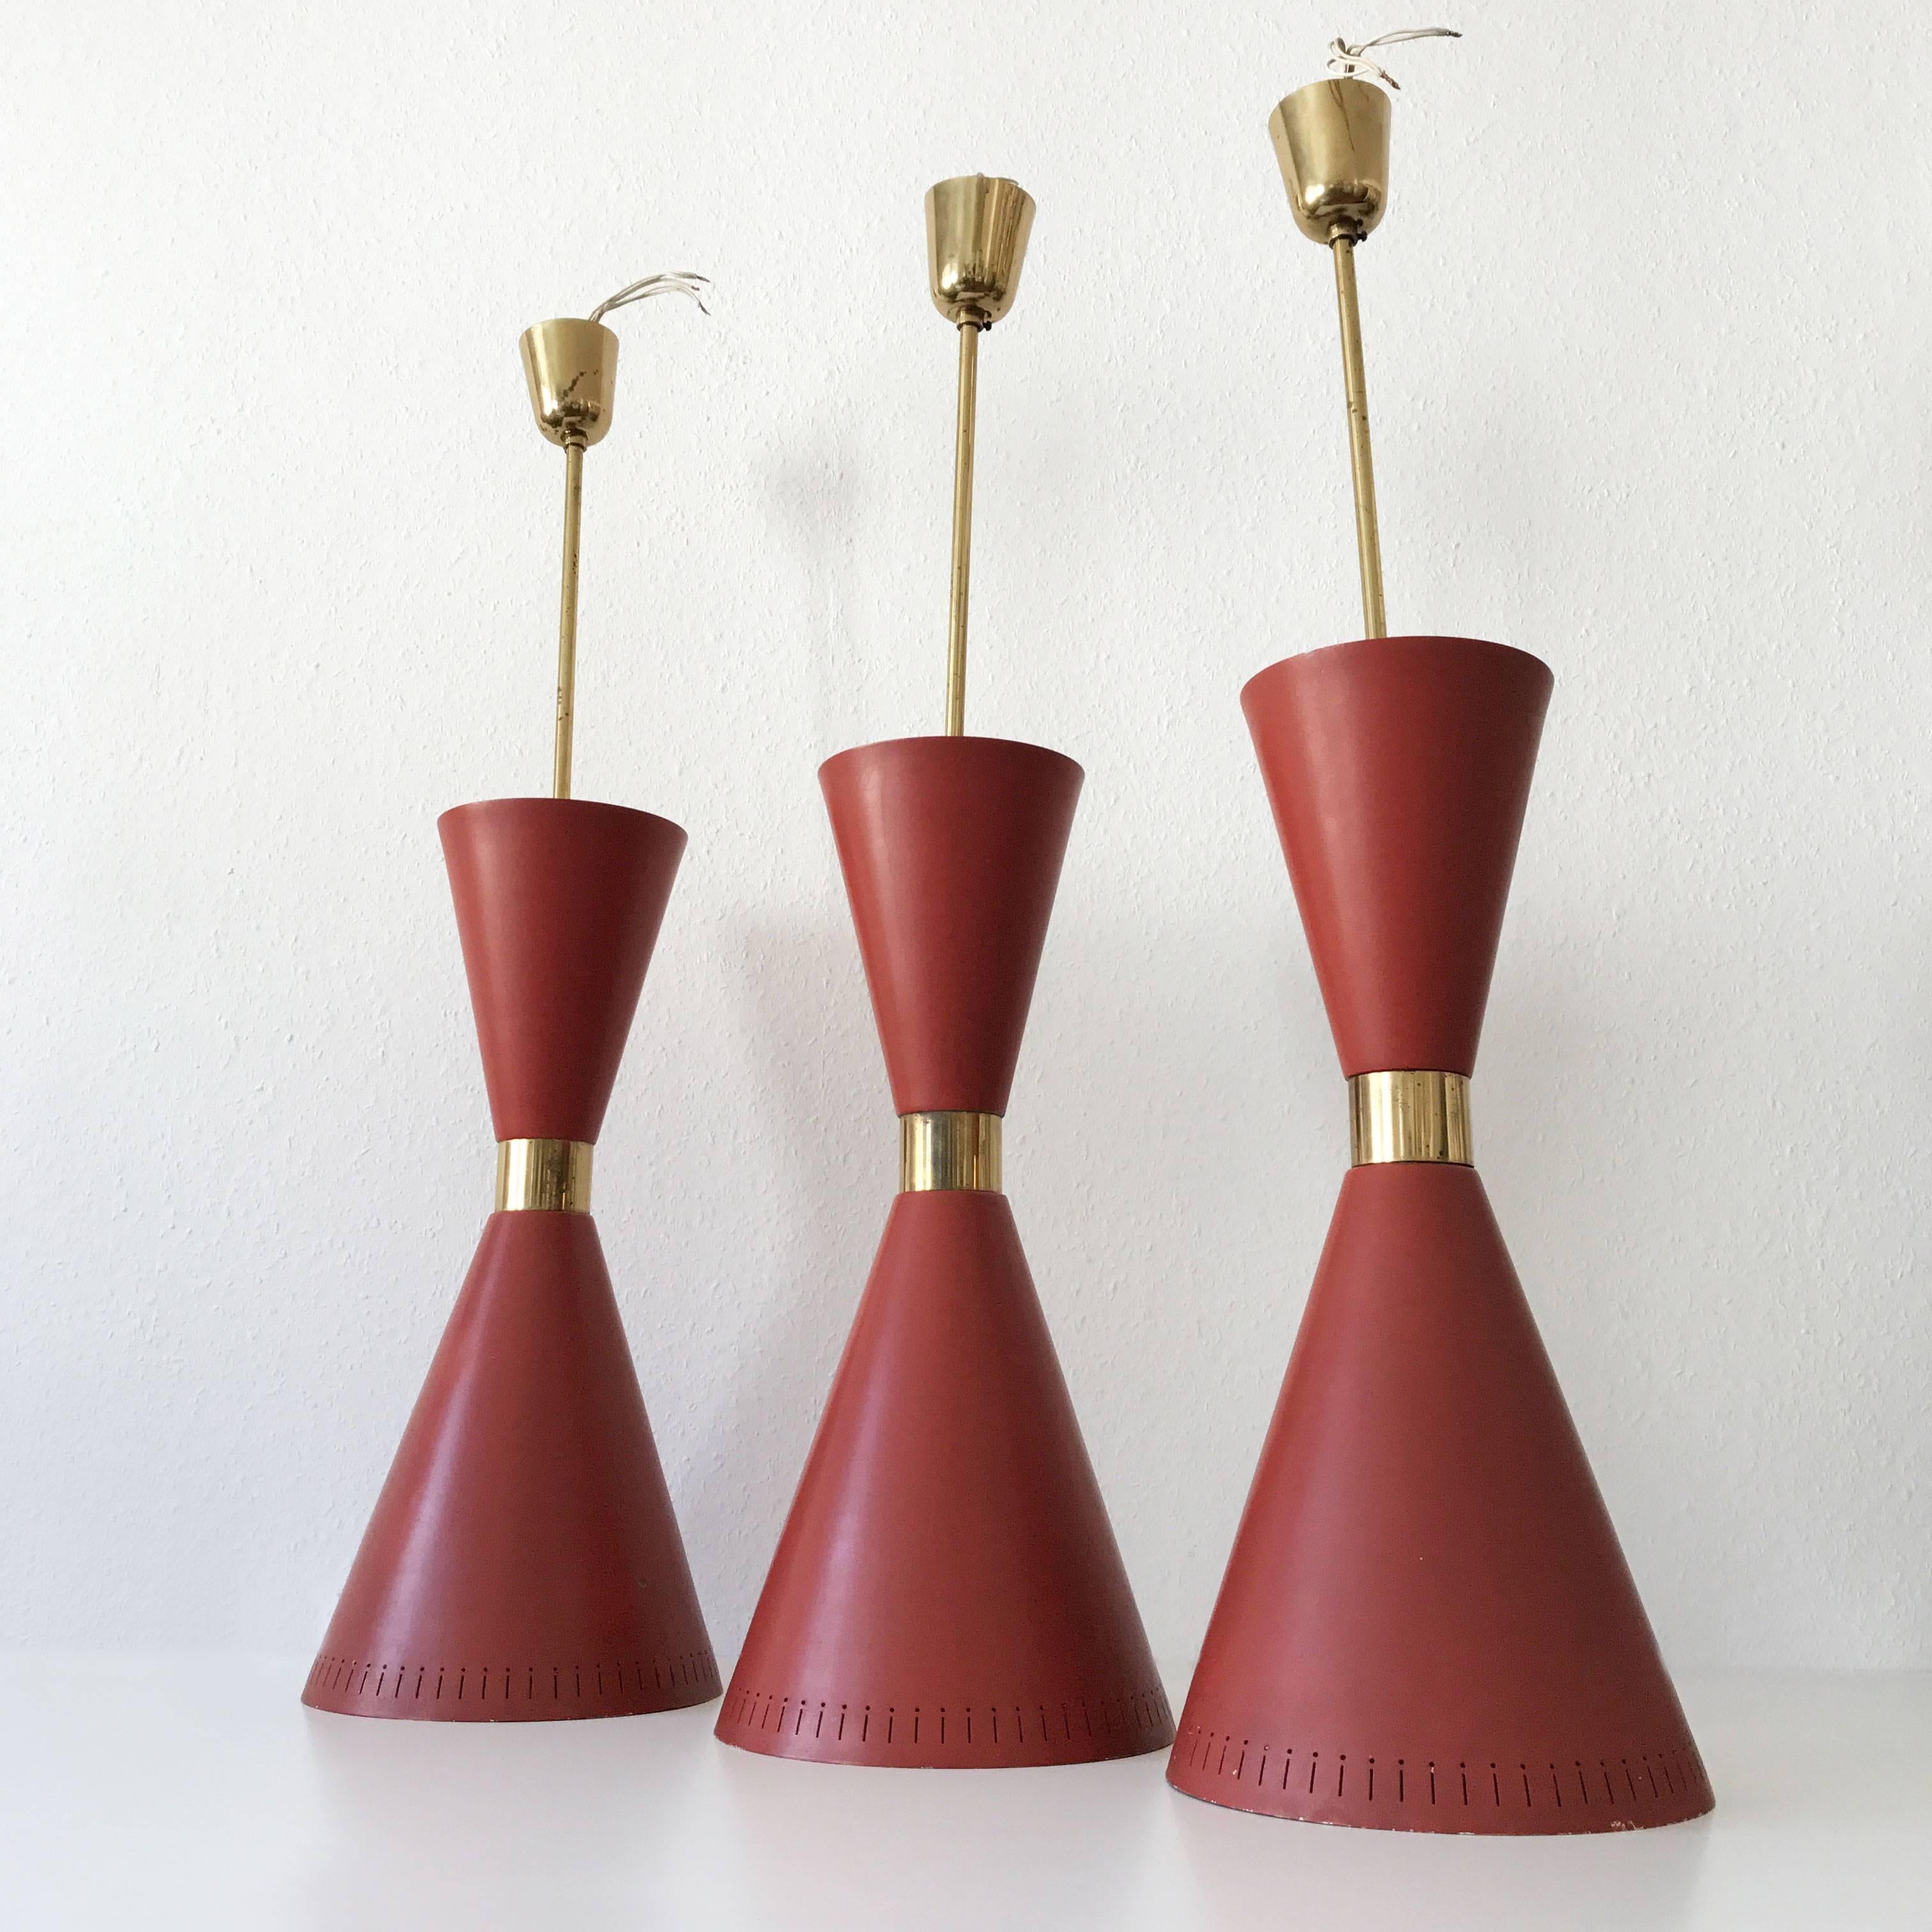 Set of three extremely rare and large diabolo pendant lamps or hanging light with perforated aluminum shade in dark red / bordeaux color. Manufactured probably by BAG Turgi, Switzerland. Originals from 1950s. 

Executed in perforated and in dark red